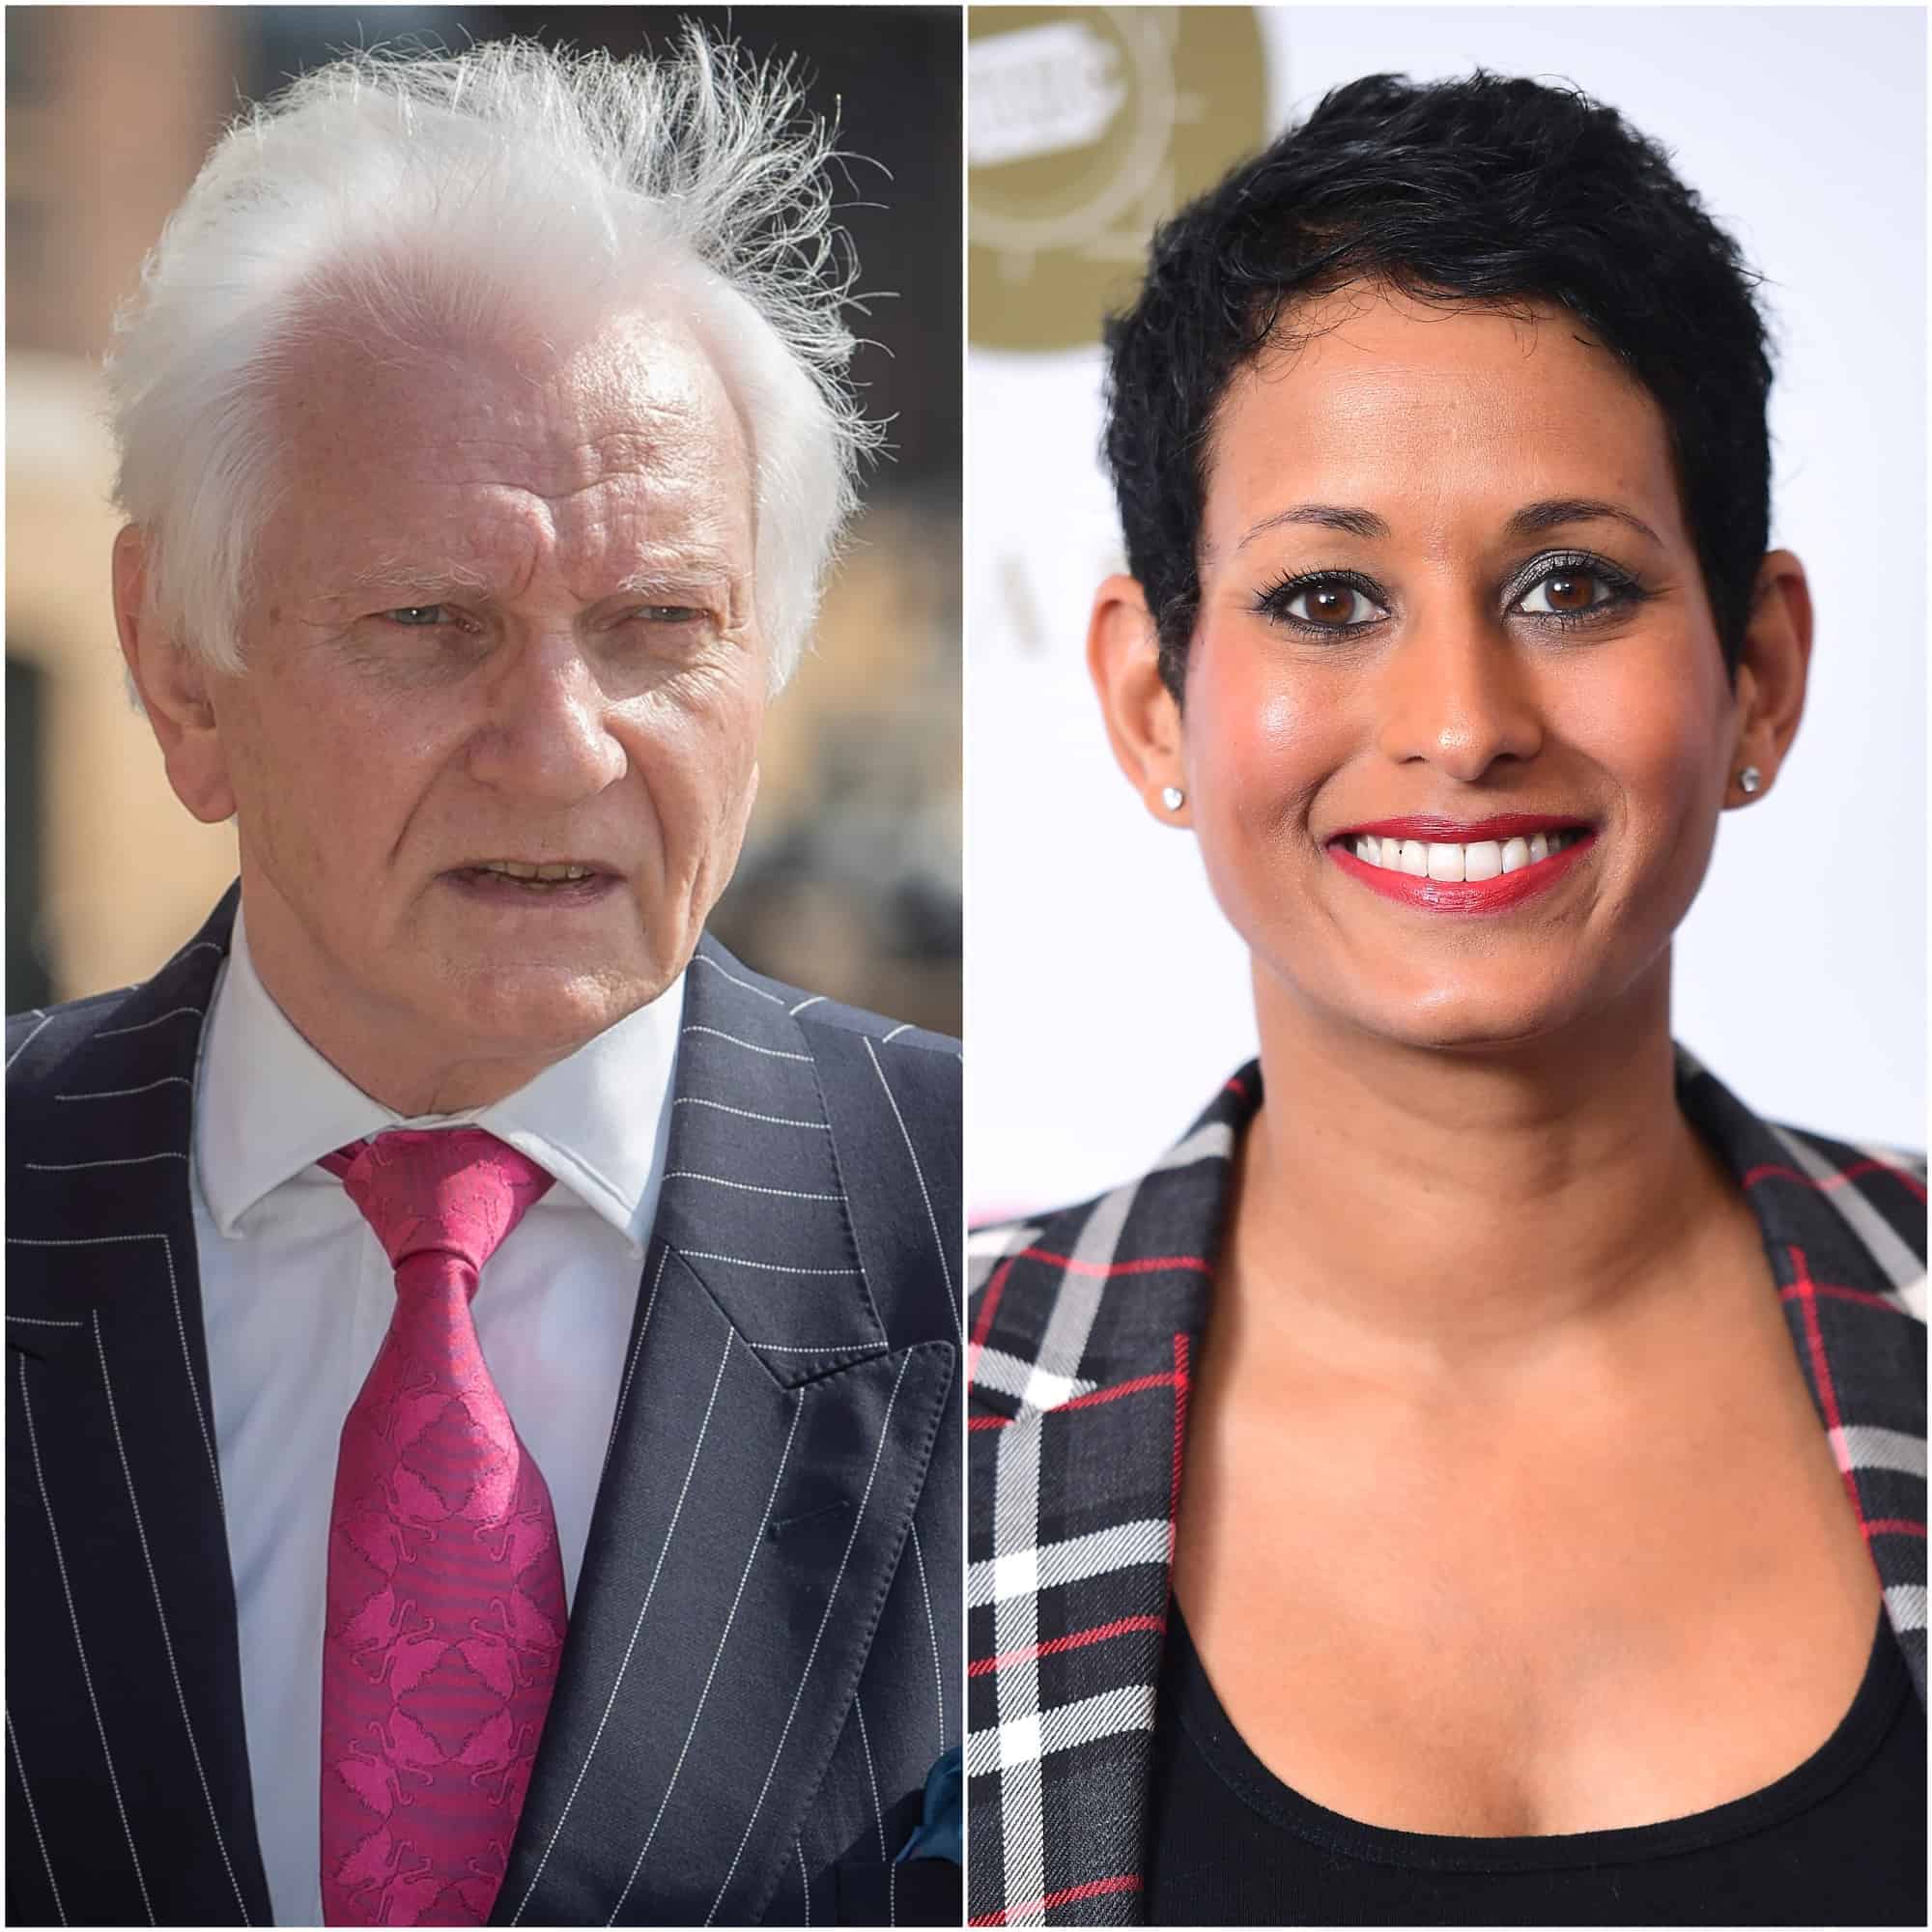 Harvey Proctor walks out of tense interview with BBC’s Naga Munchetty